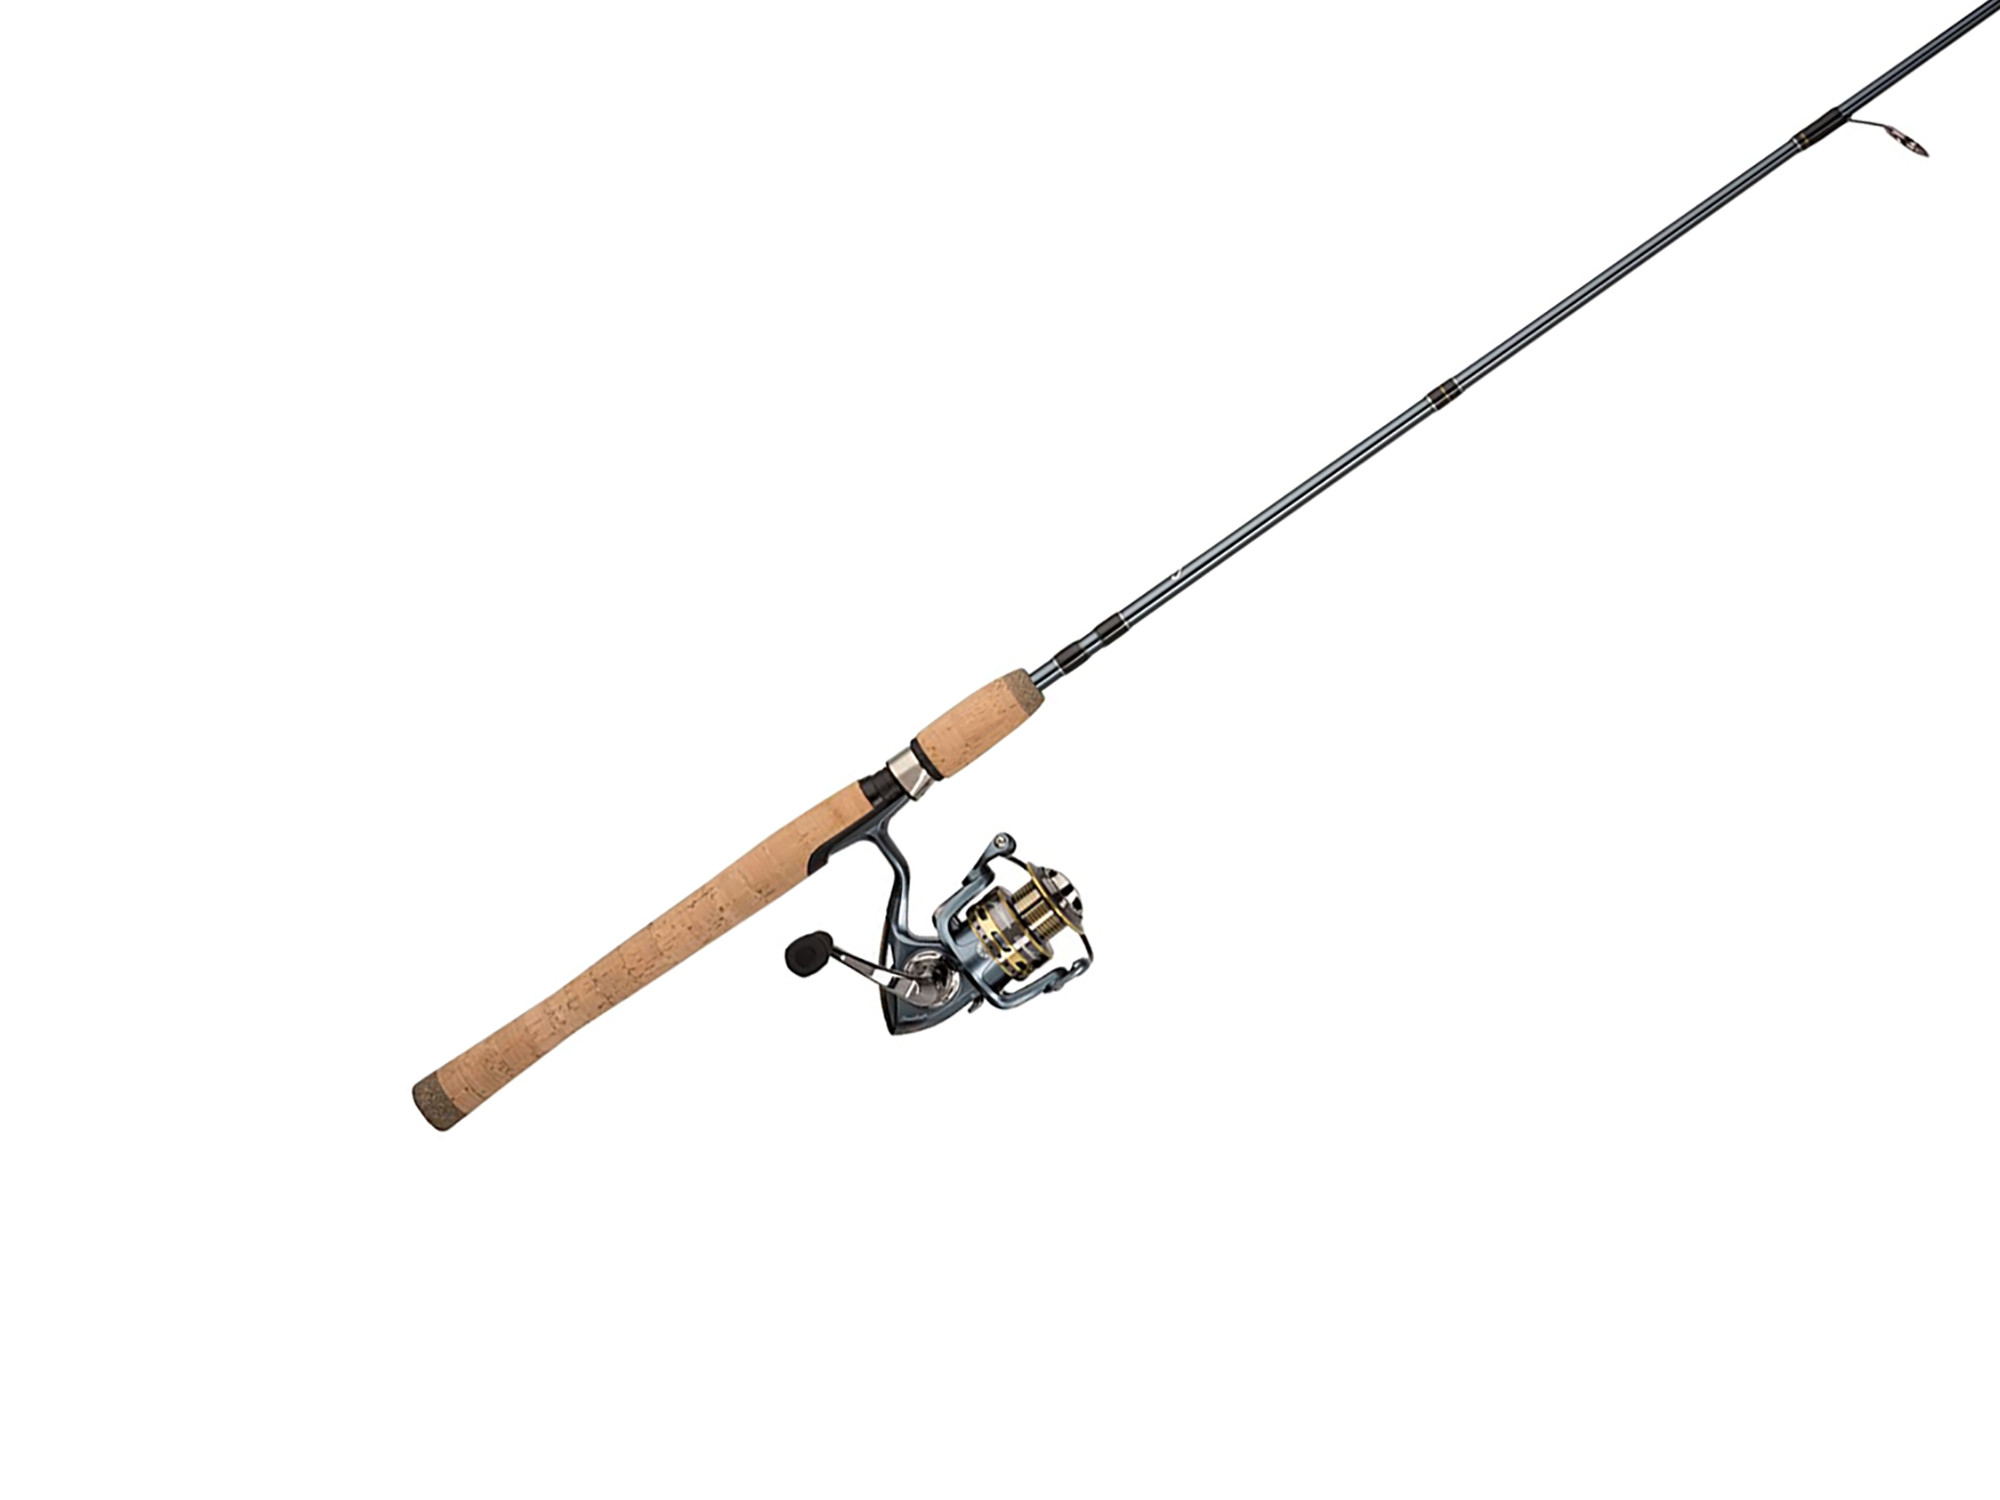 Pflueger President 30 with 6'6 M 2-Piece Rod Combo - PRESSP-6630M2CBO from  PFLUEGER - CHAOS Fishing